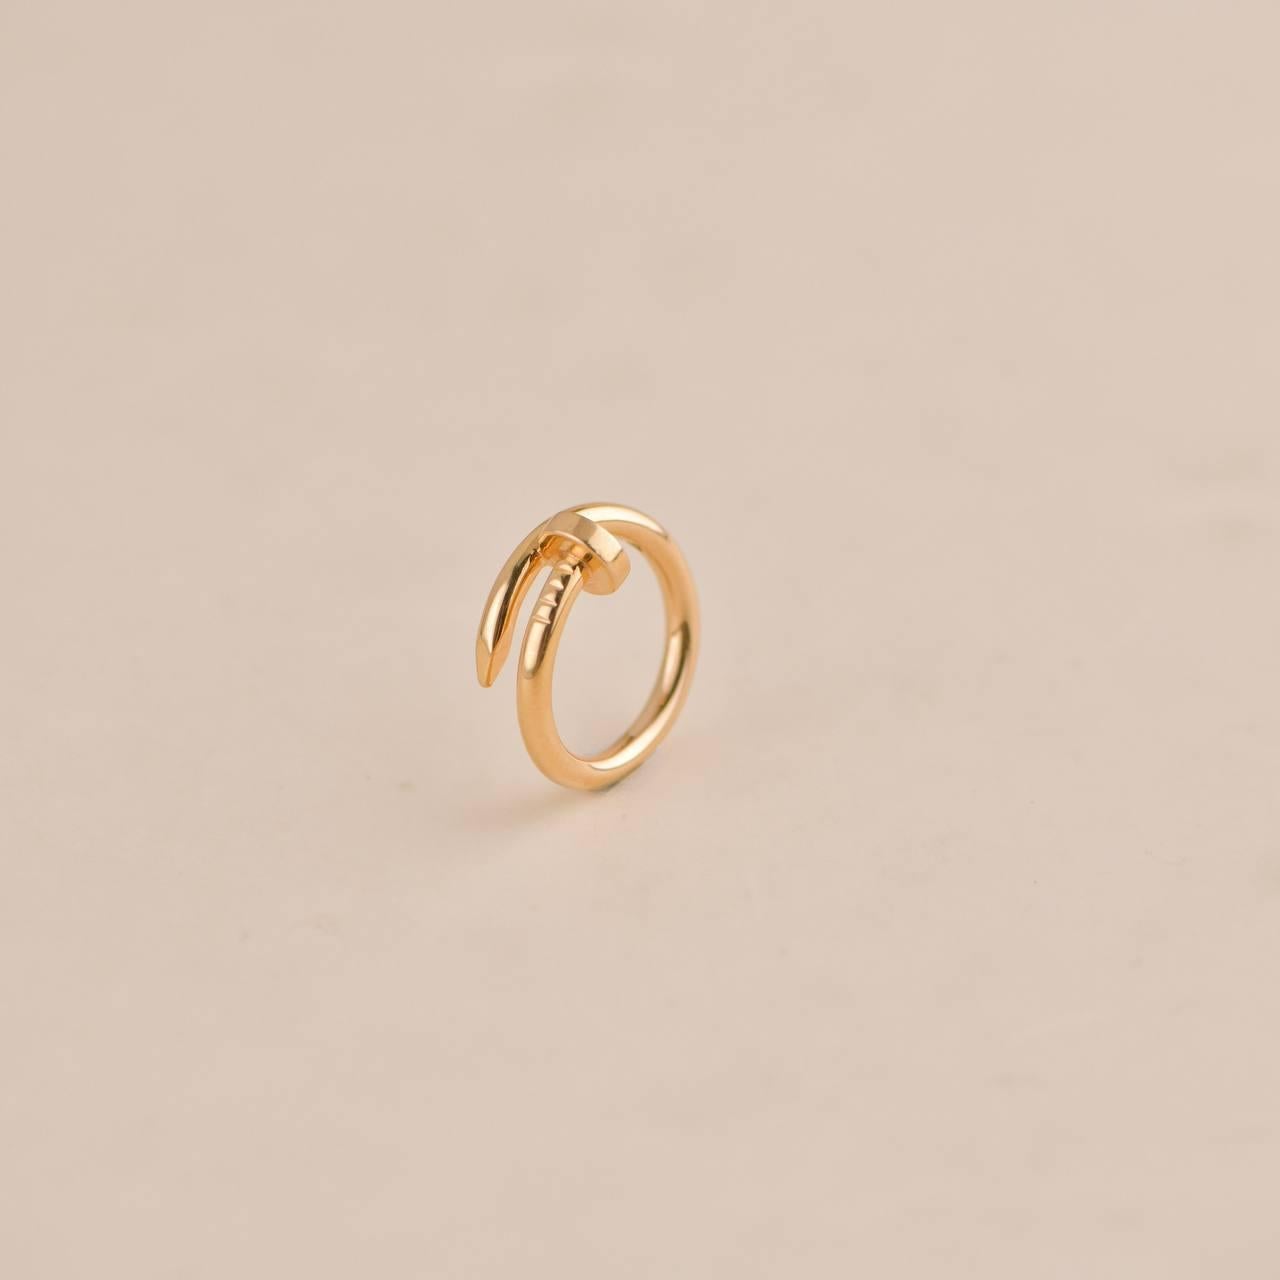 Cartier Juste Un Clou Rose Gold Ring Size 55 In Excellent Condition For Sale In Banbury, GB